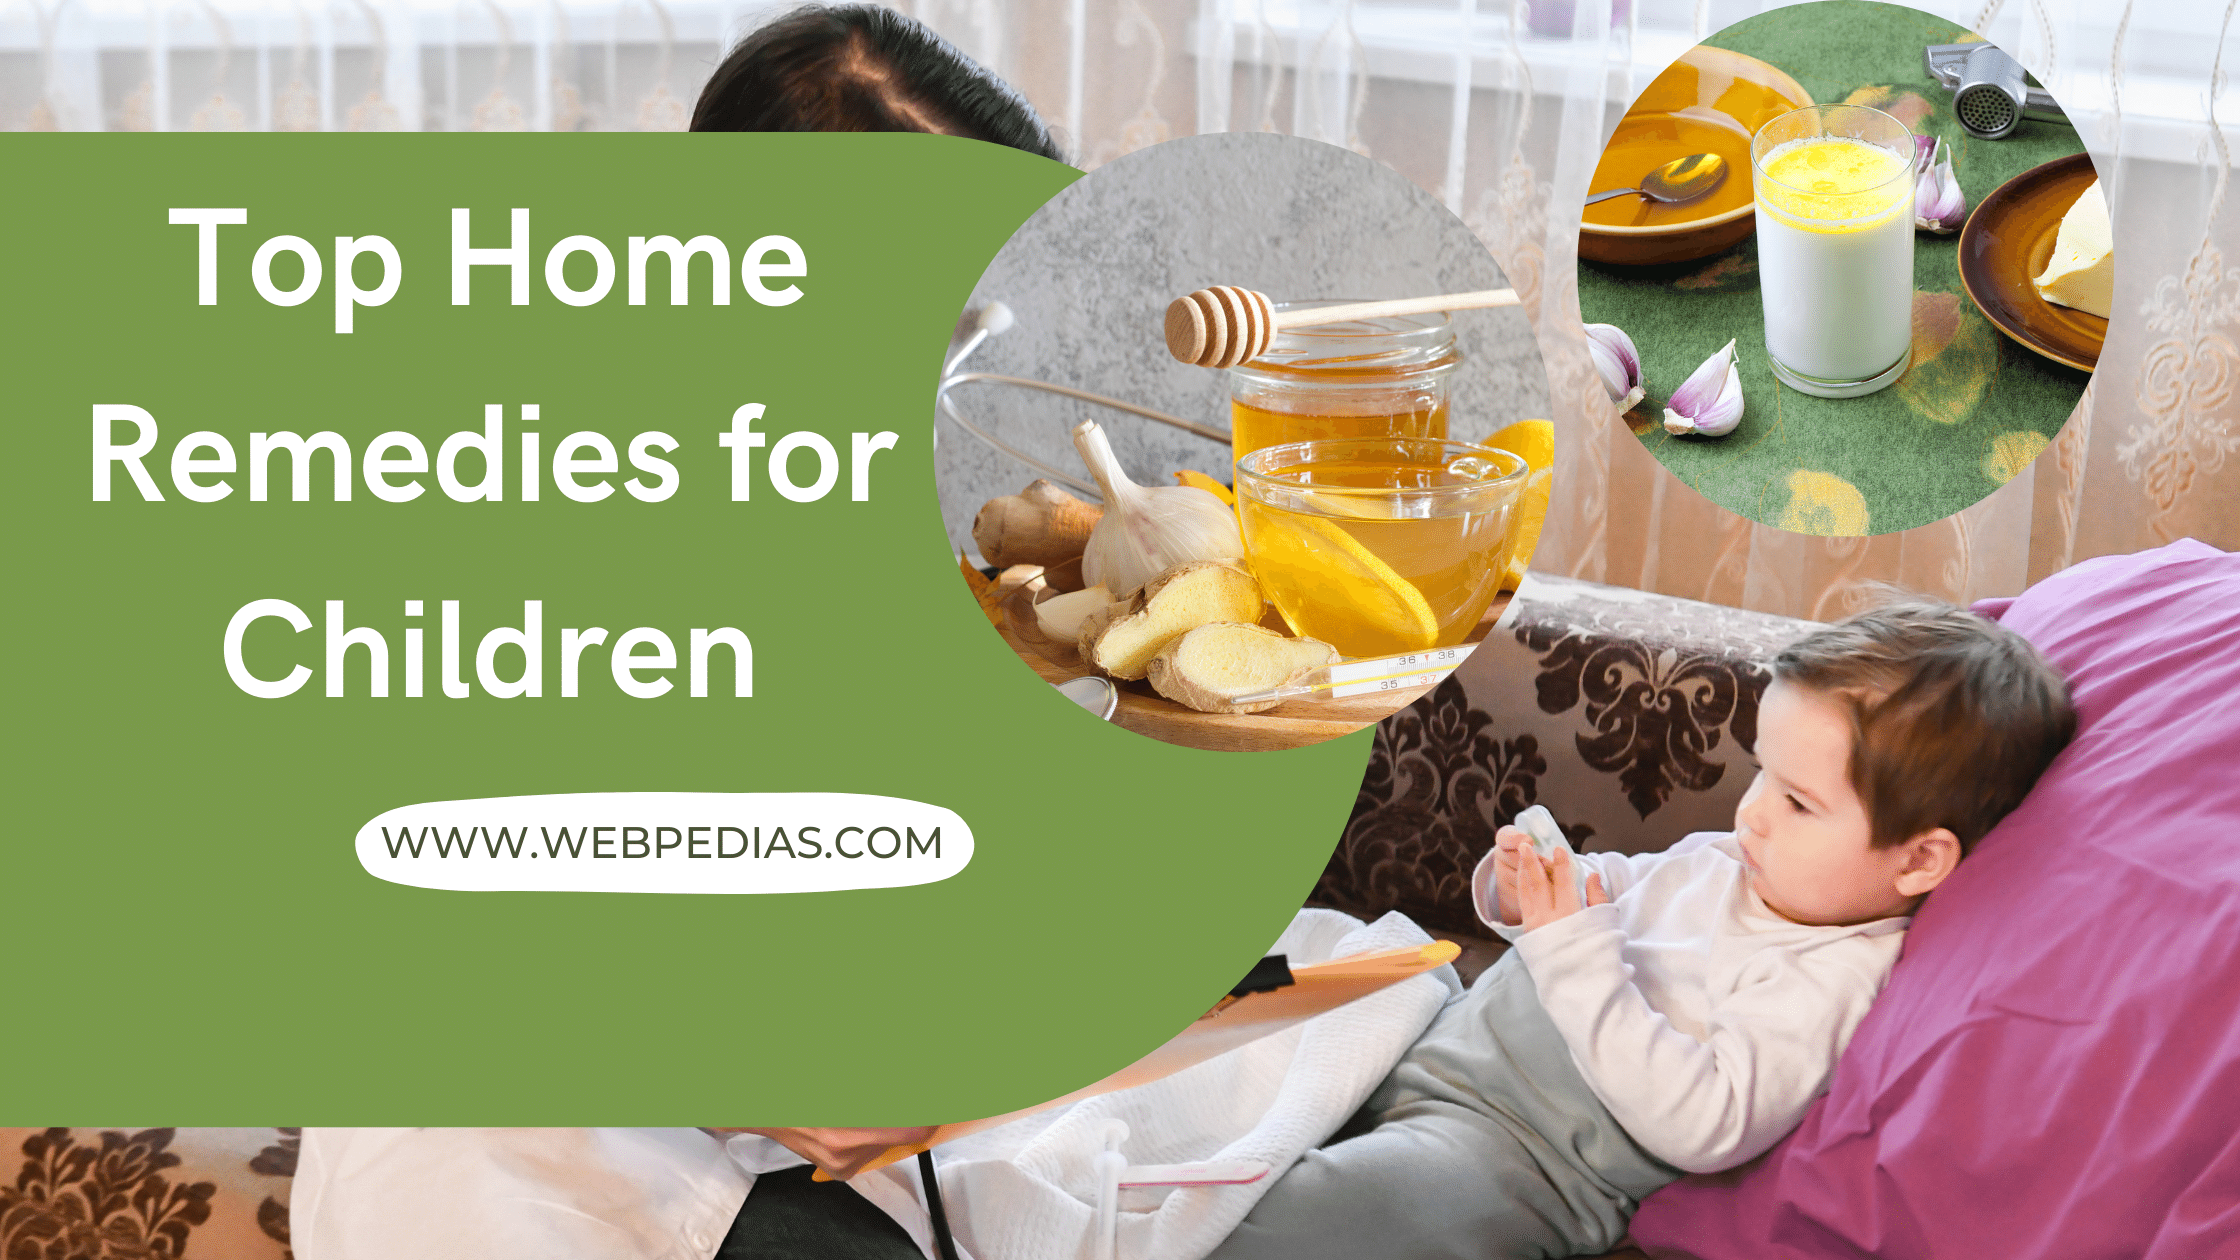 Top Home Remedies for Children